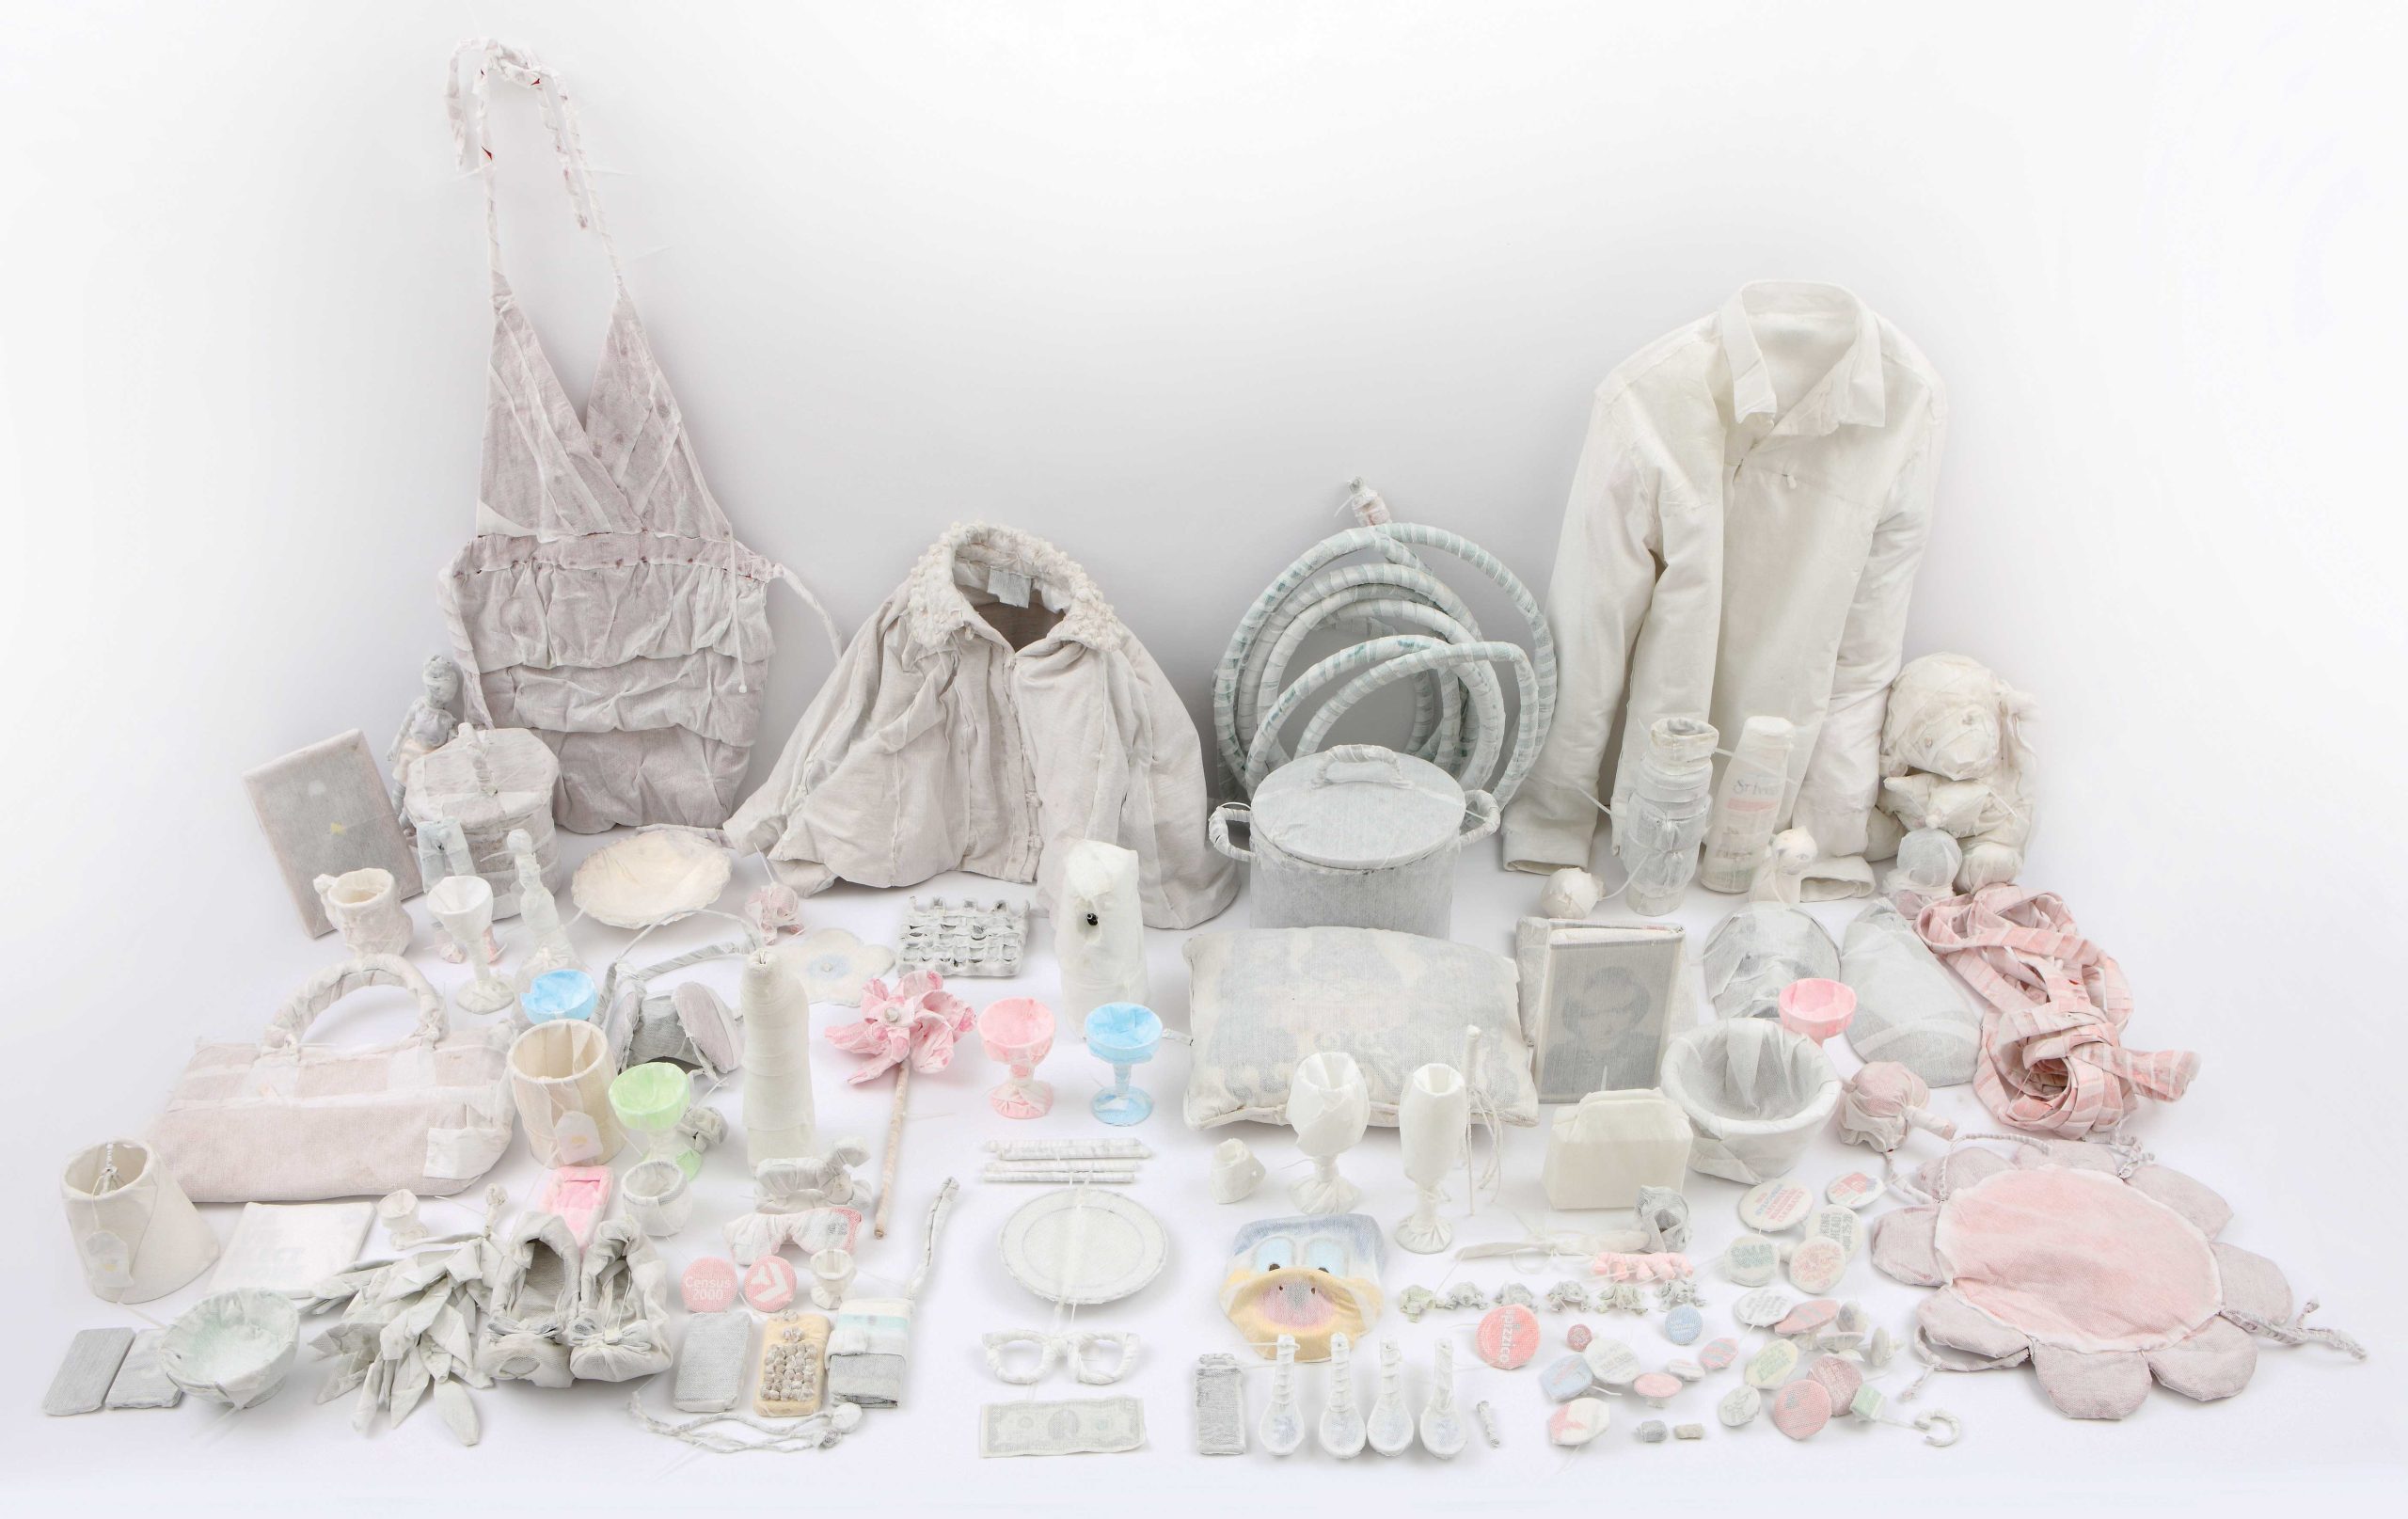 Almost Gone, 2016, Installation, 121 objects gathered from people in New York State, wrapped with wipe, Dimensions variable. Photo by Manour Dib